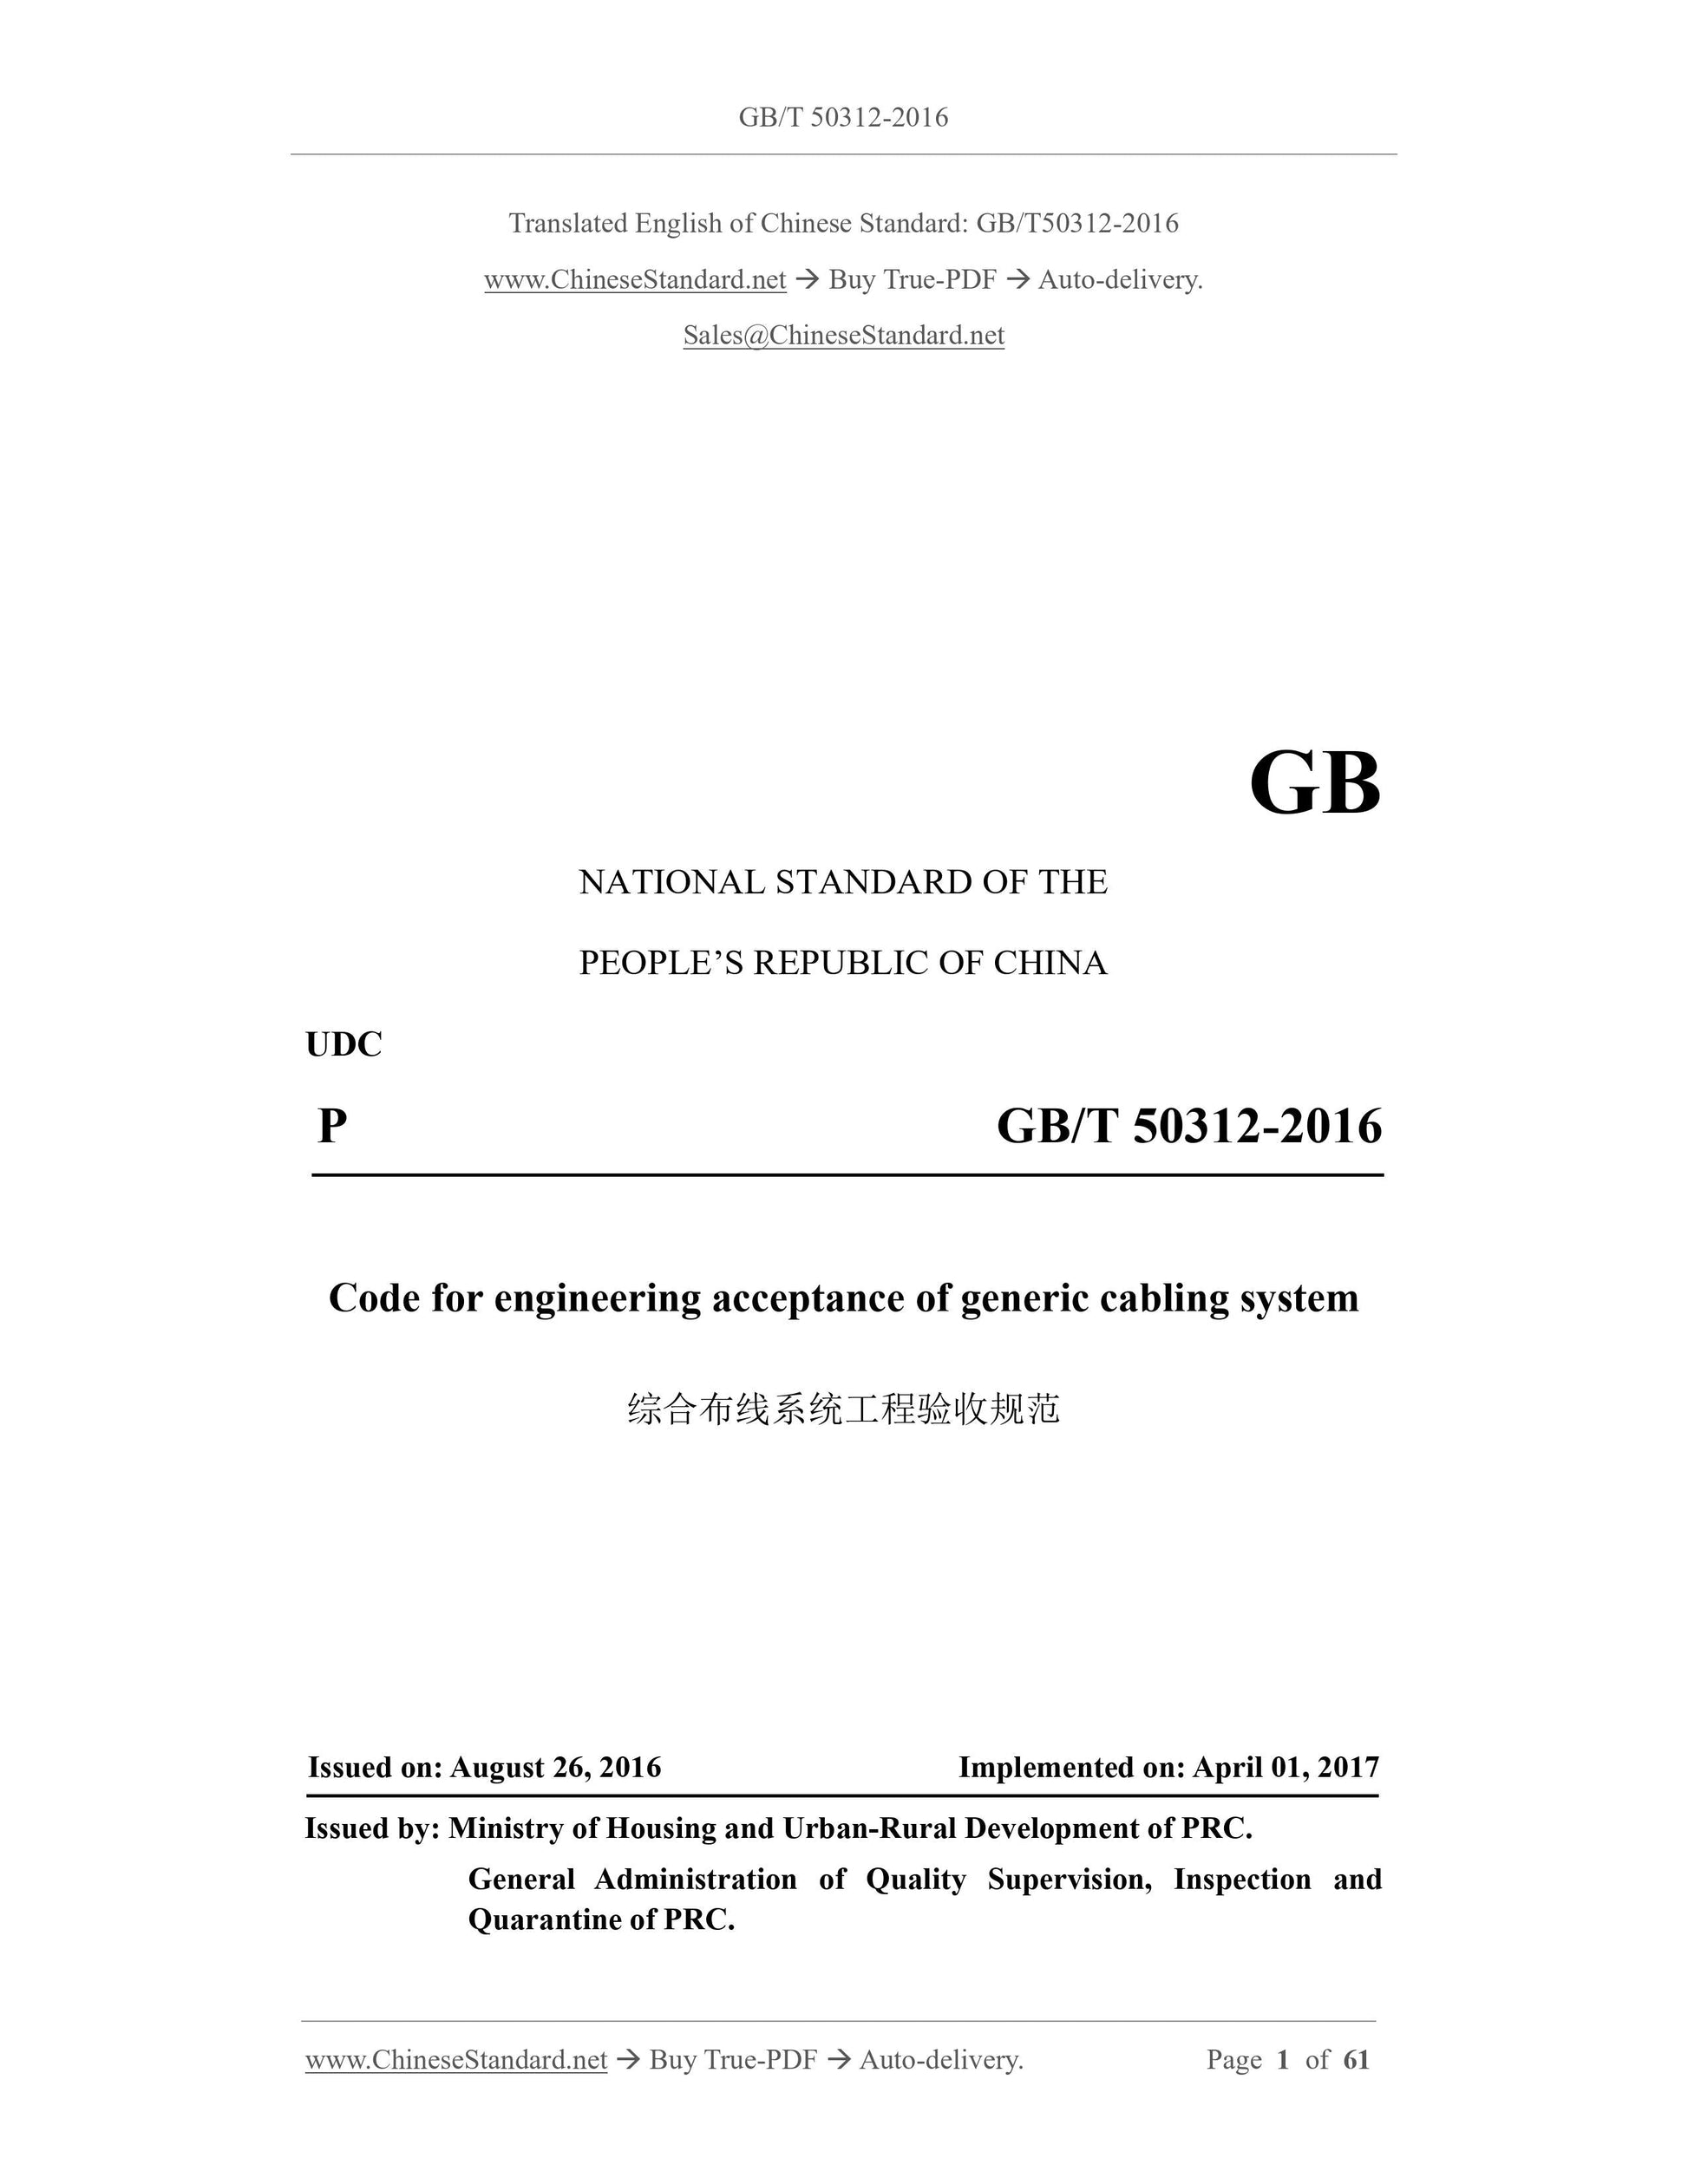 GB/T 50312-2016 Page 1